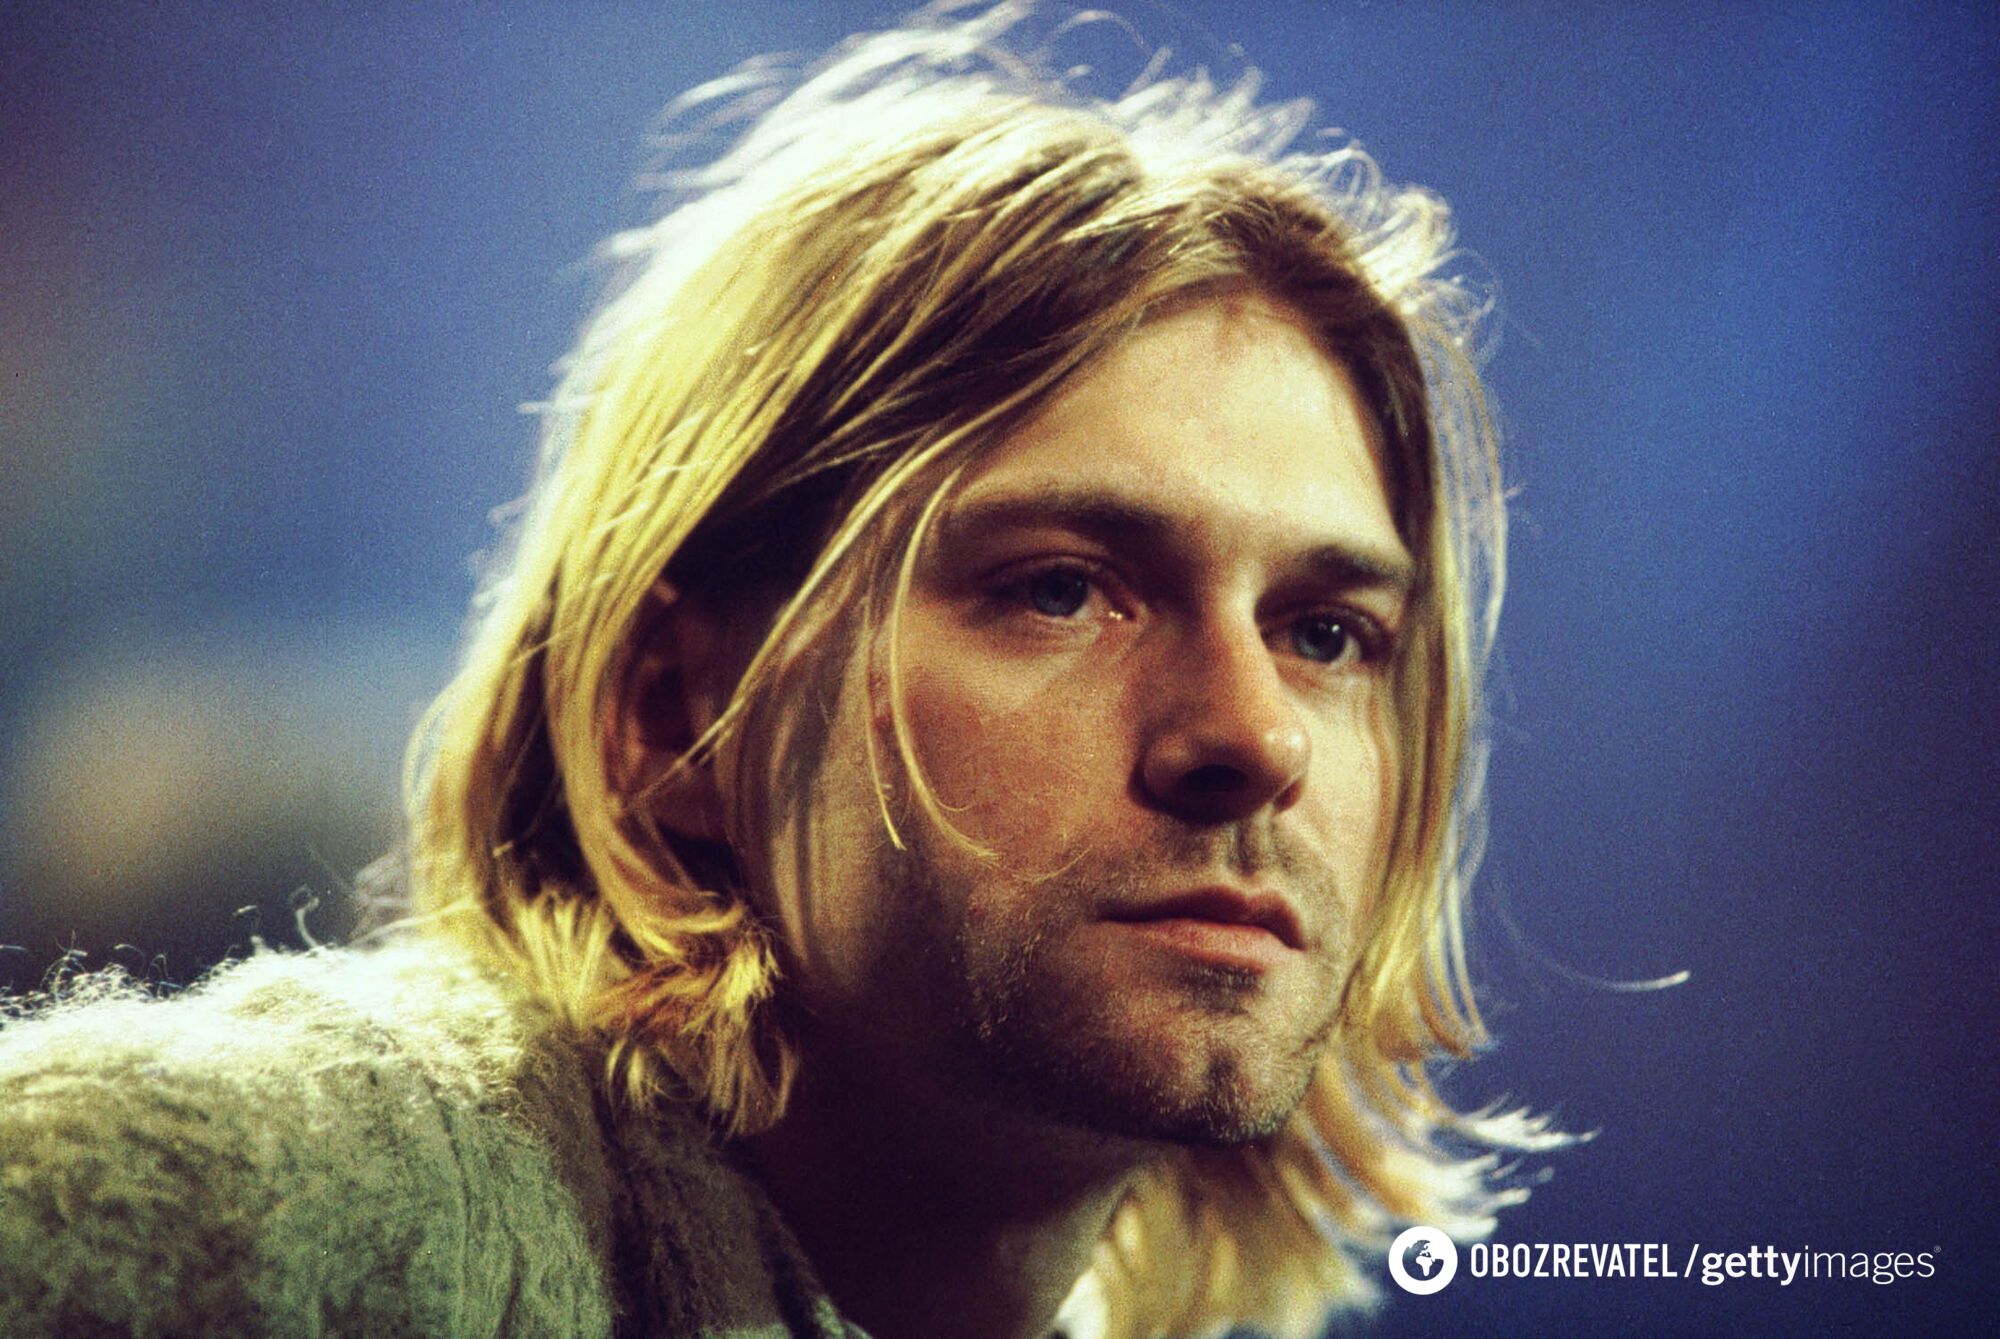 Drugs since the age of 13, a high-profile scandal on MTV, and a terrible suicide. What tragedies were hidden behind the fame of Nirvana leader Kurt Cobain